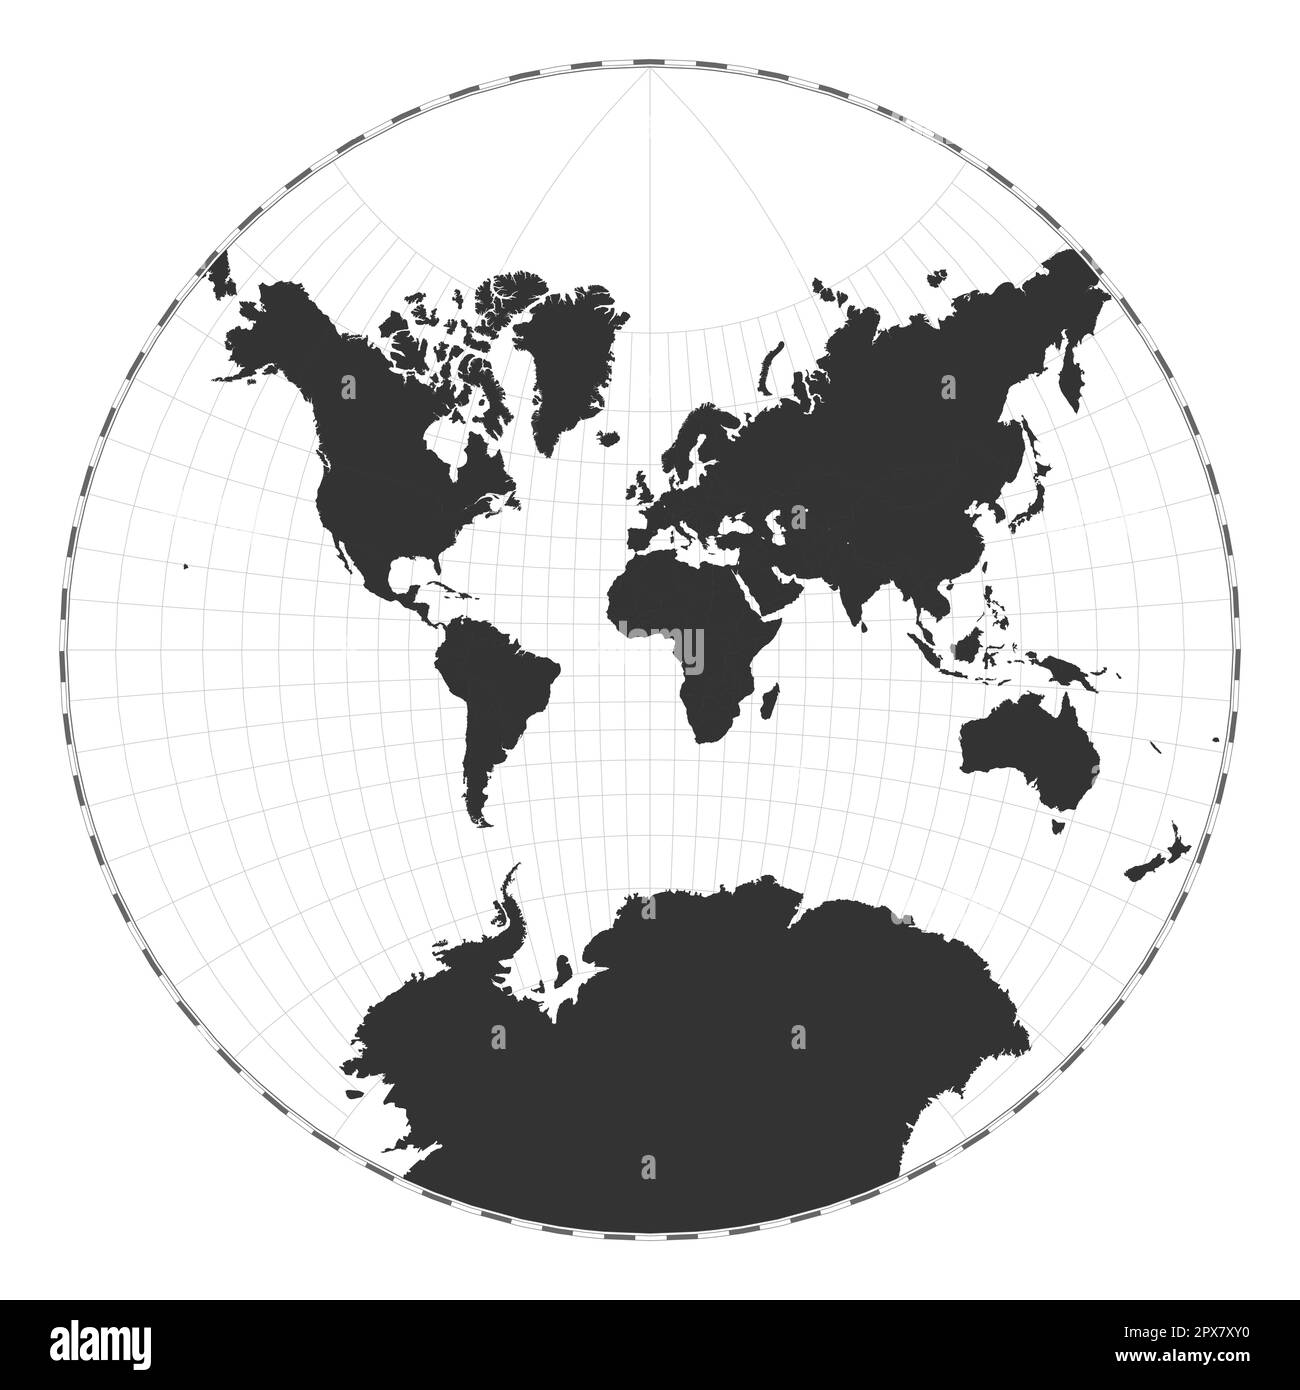 Vector world map. Lagrange conformal projection. Plain world geographical map with latitude and longitude lines. Centered to 0deg longitude. Vector il Stock Vector